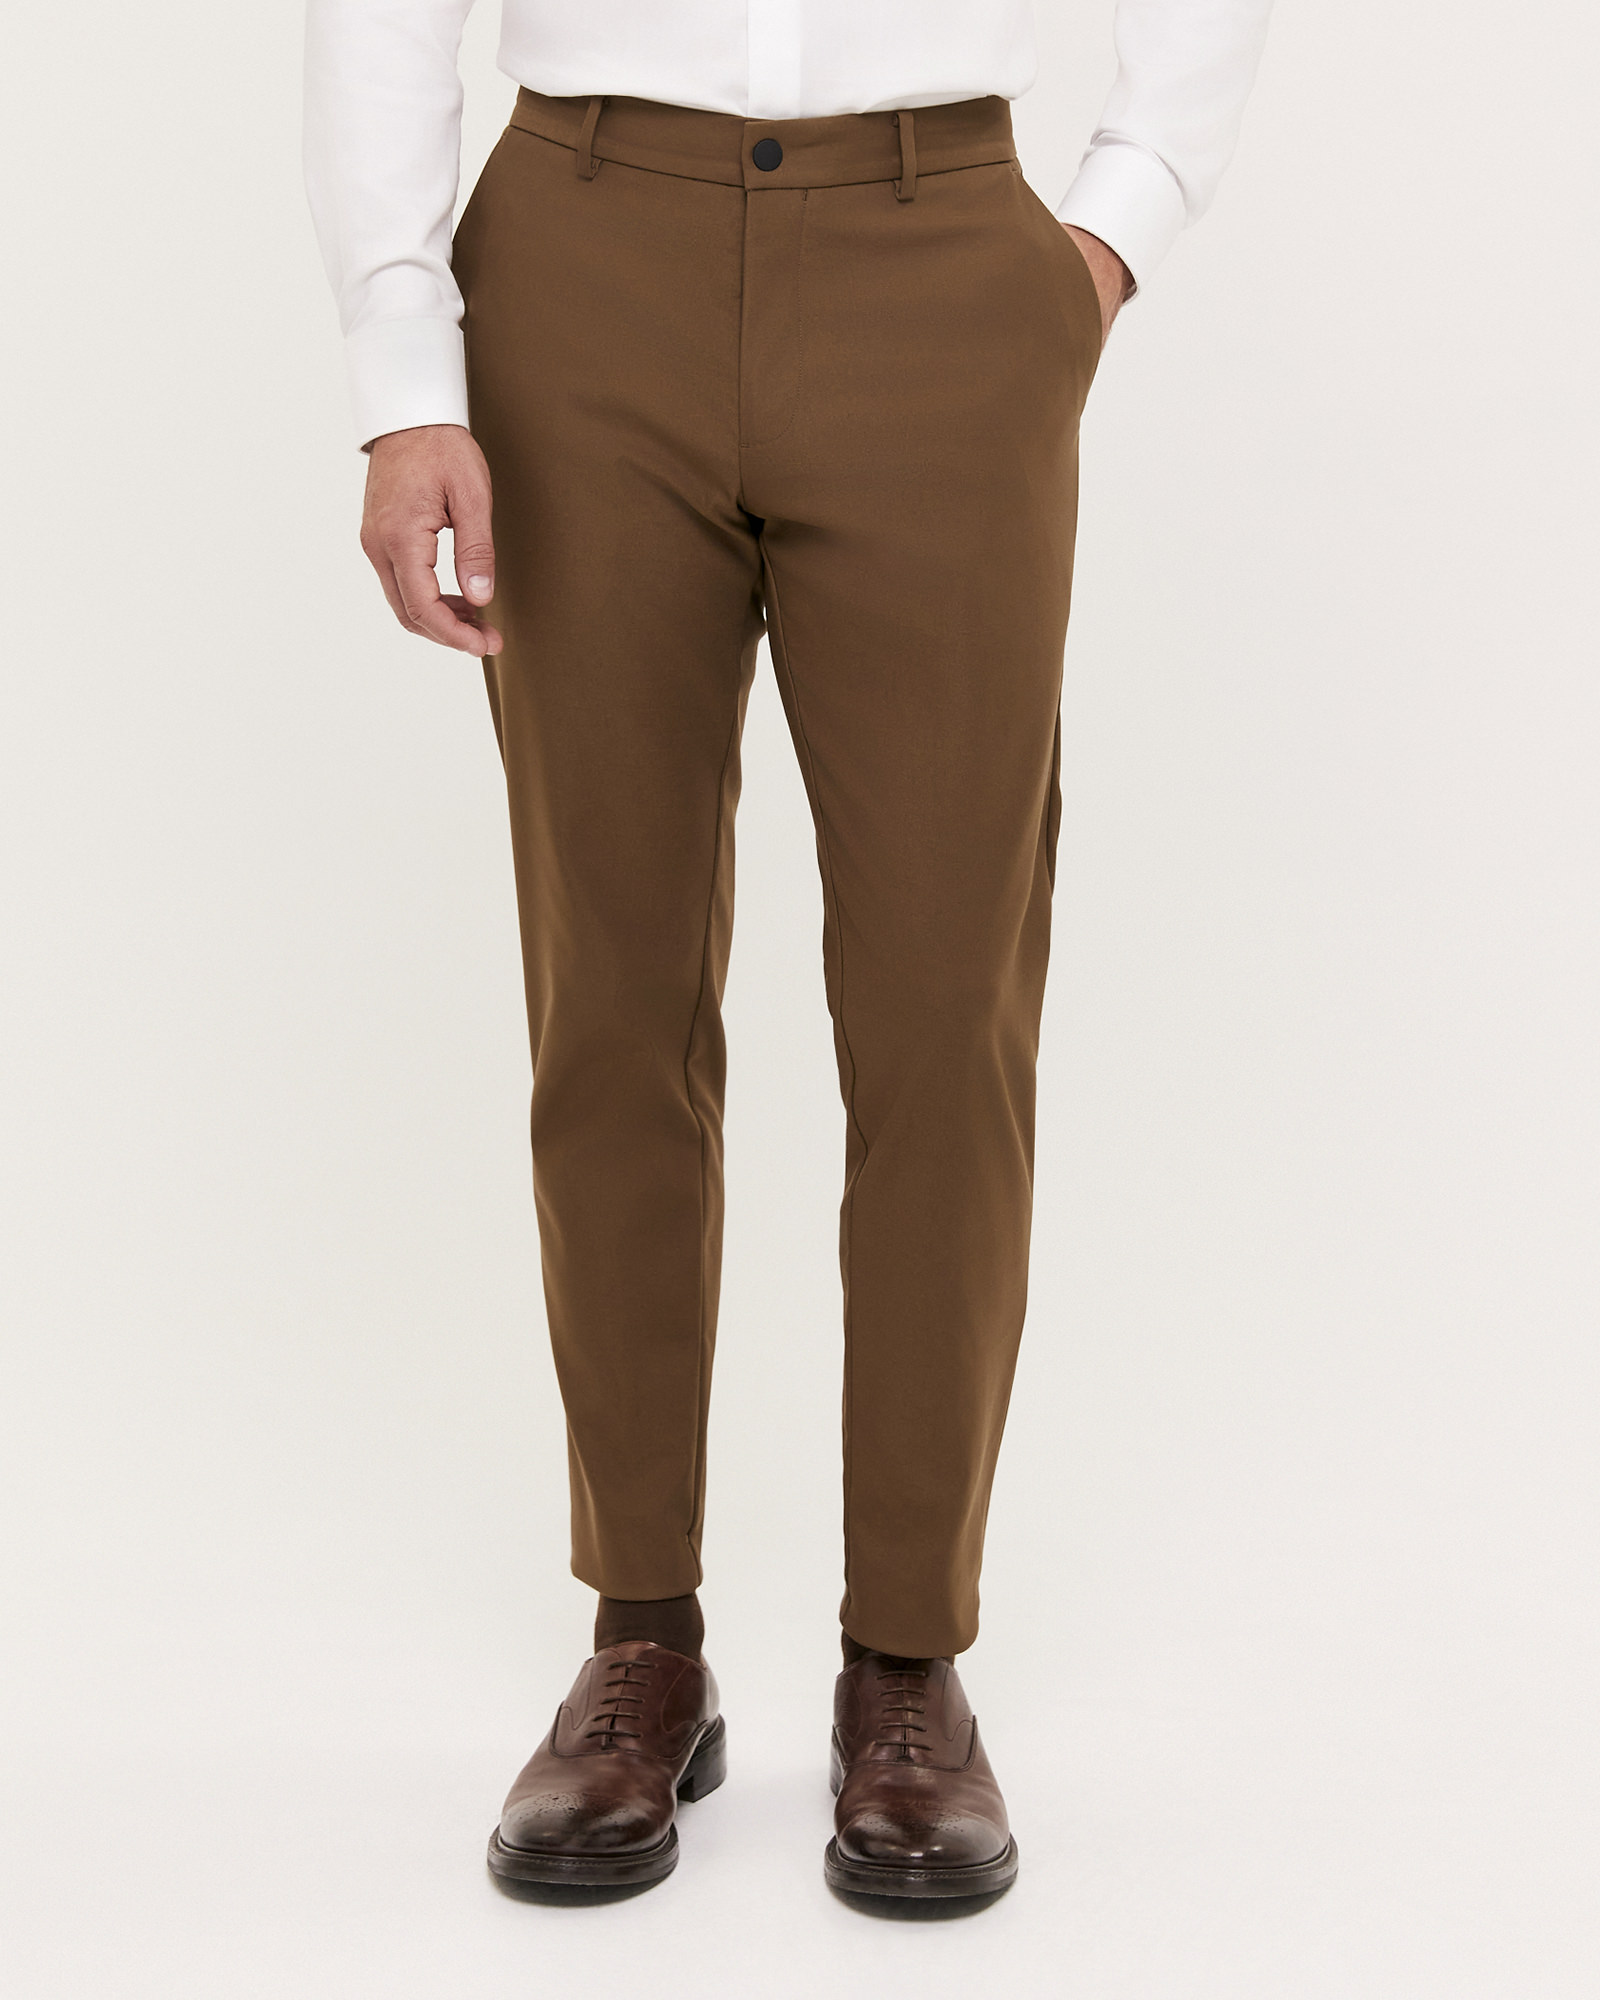 Mens Brown Chinos | Regular & Slim Fit Chinos | Next Official Site